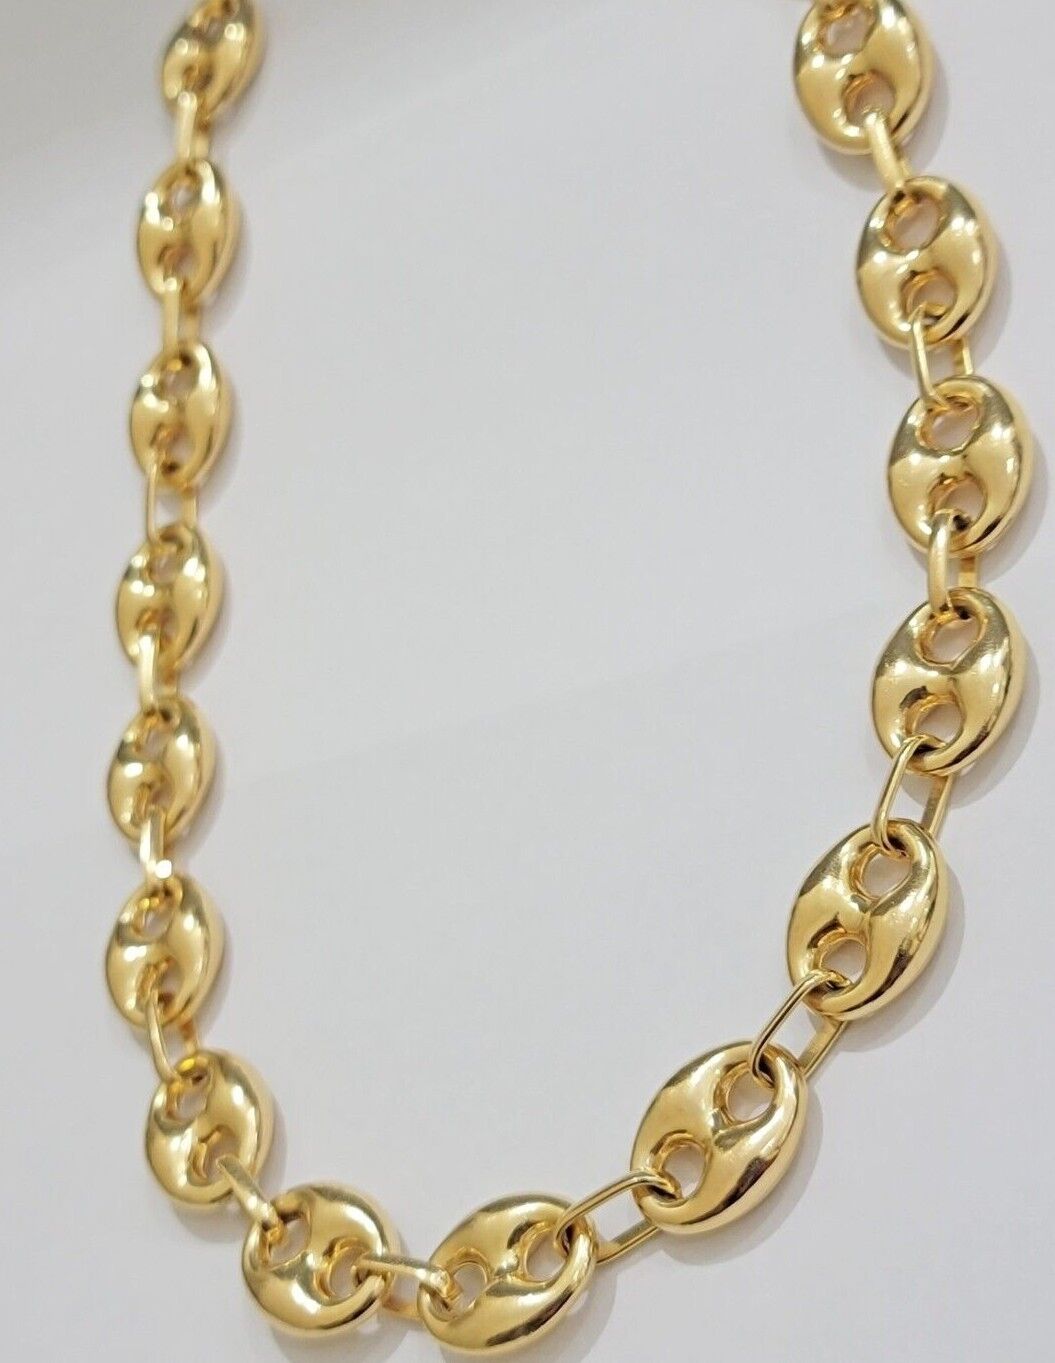 Real 10k Gold Puffed Mariner Anchor Link Chain Necklace 22" 14 mm 10KT Yellow Gd